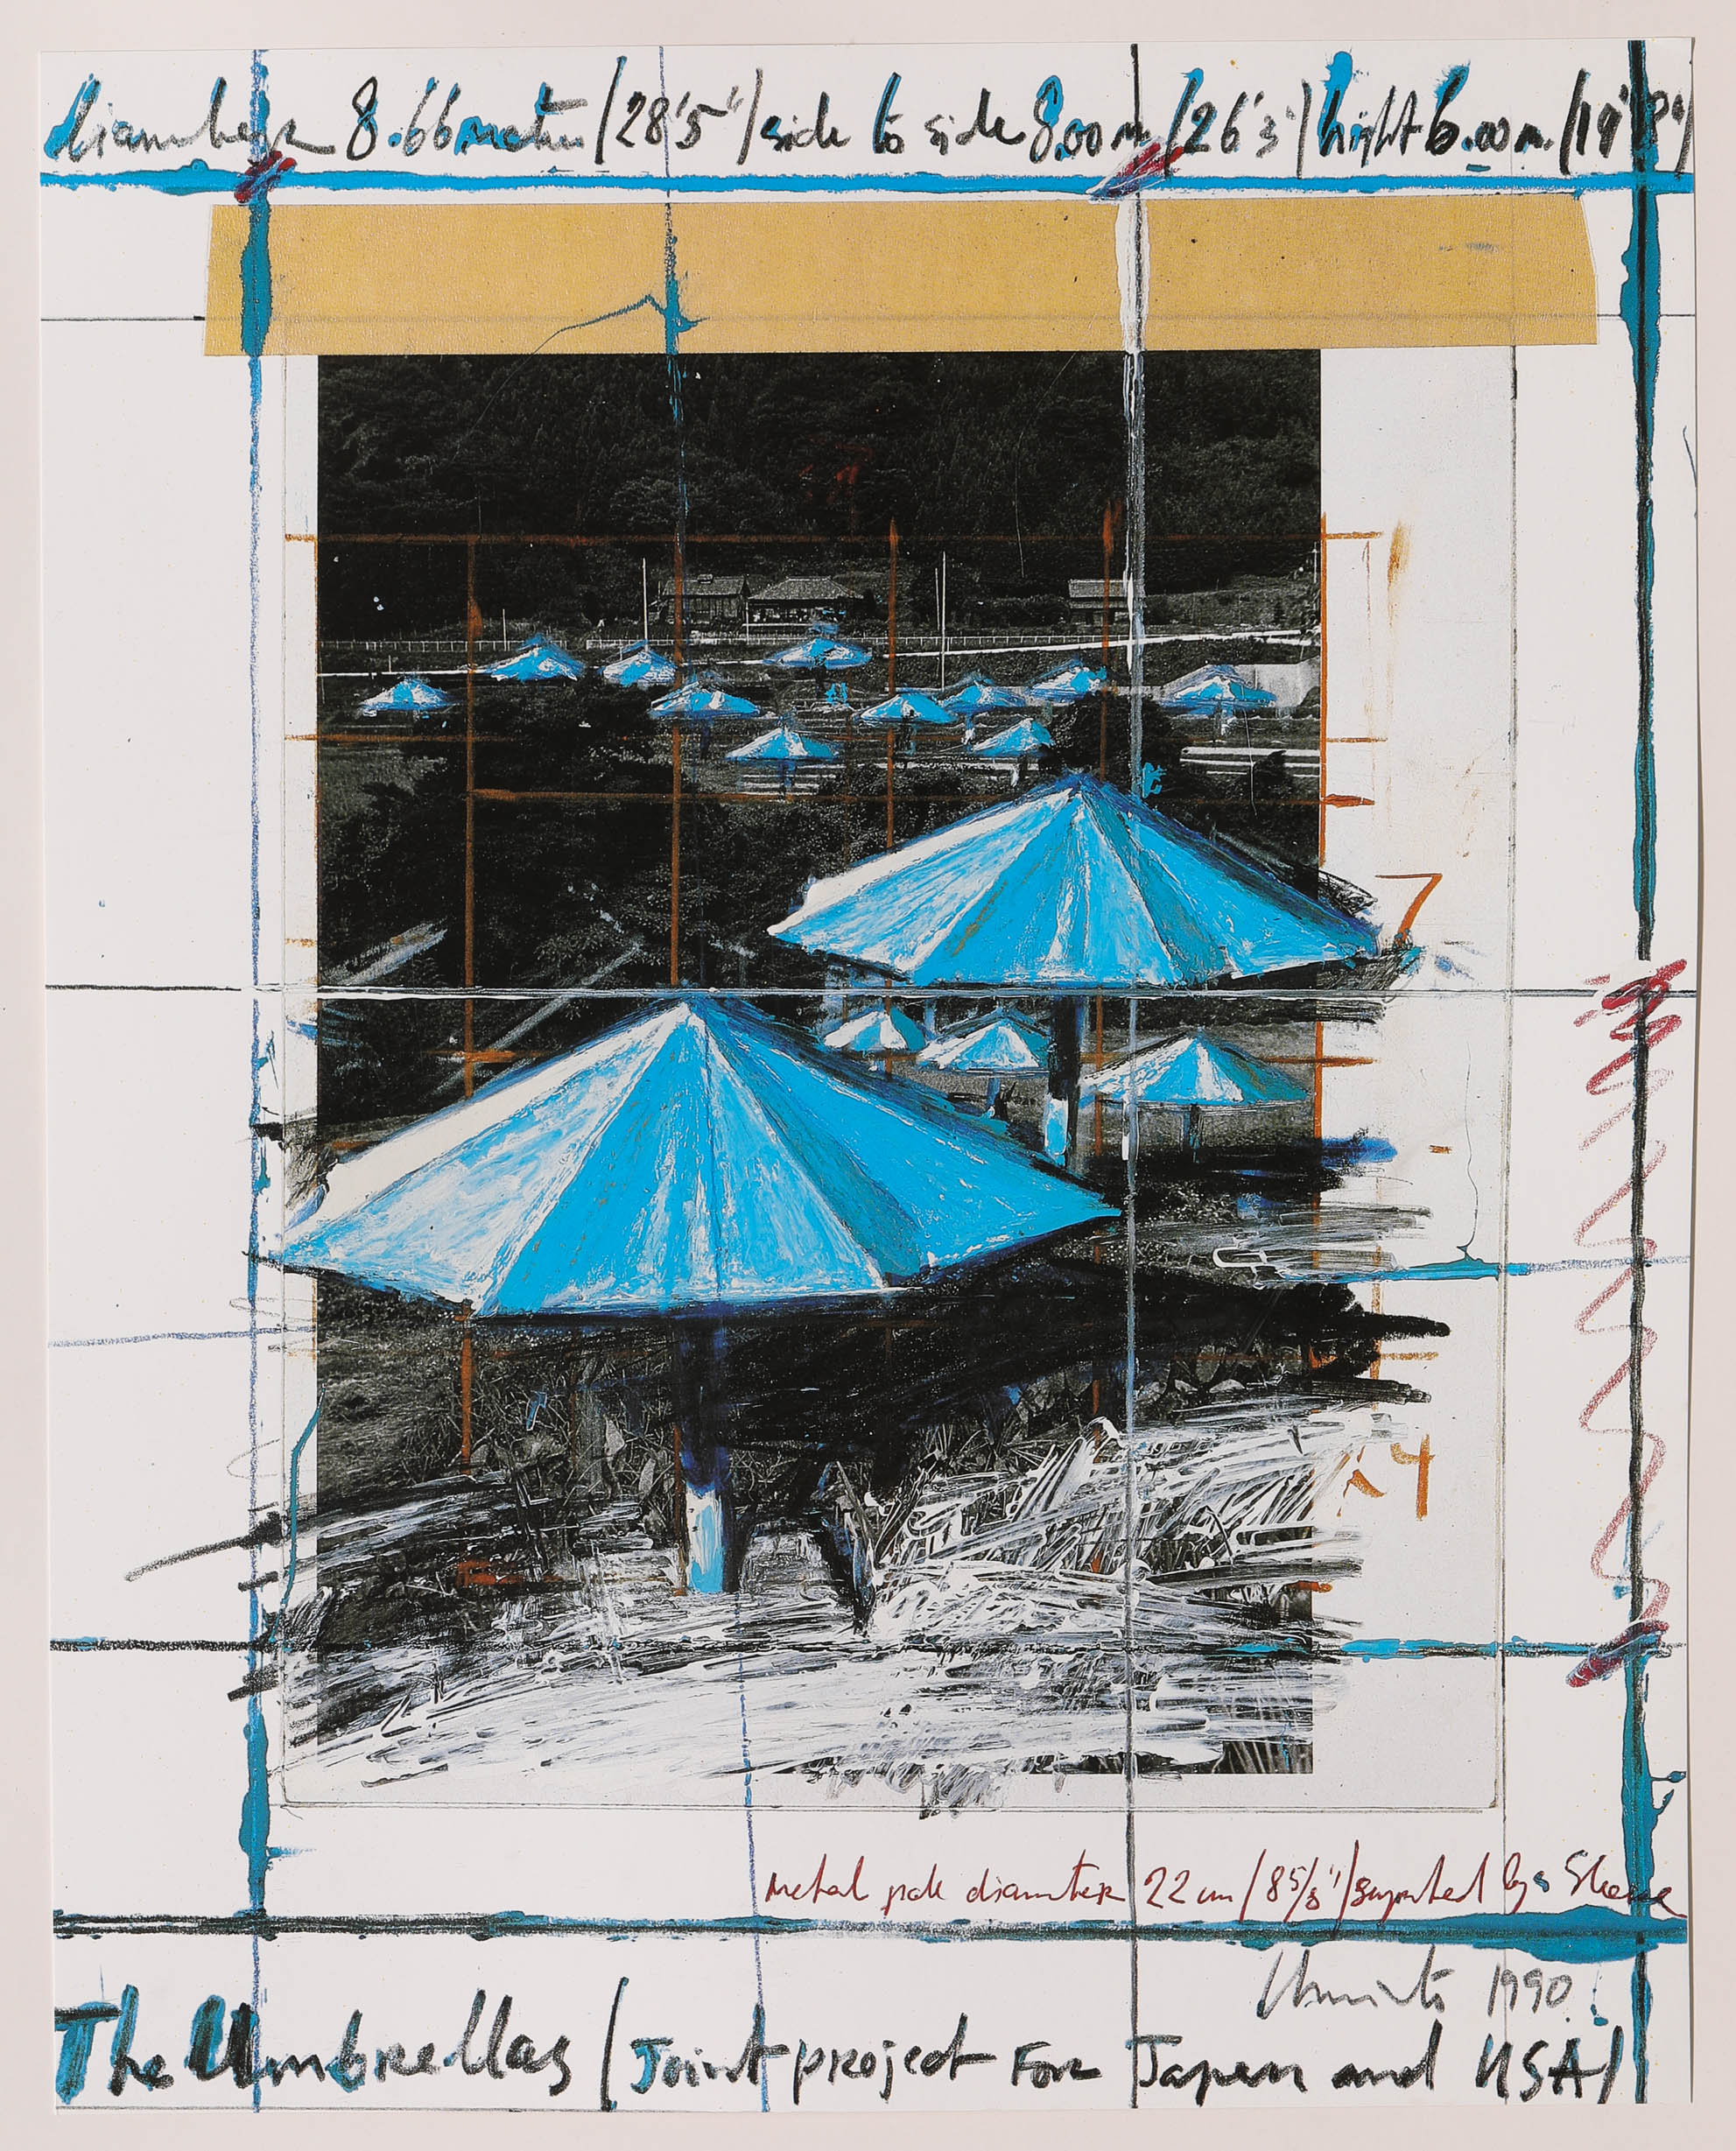 Christo*, The Umbrellas, Joint Project for Japan and U.S.A. 1991 - Bild 3 aus 7